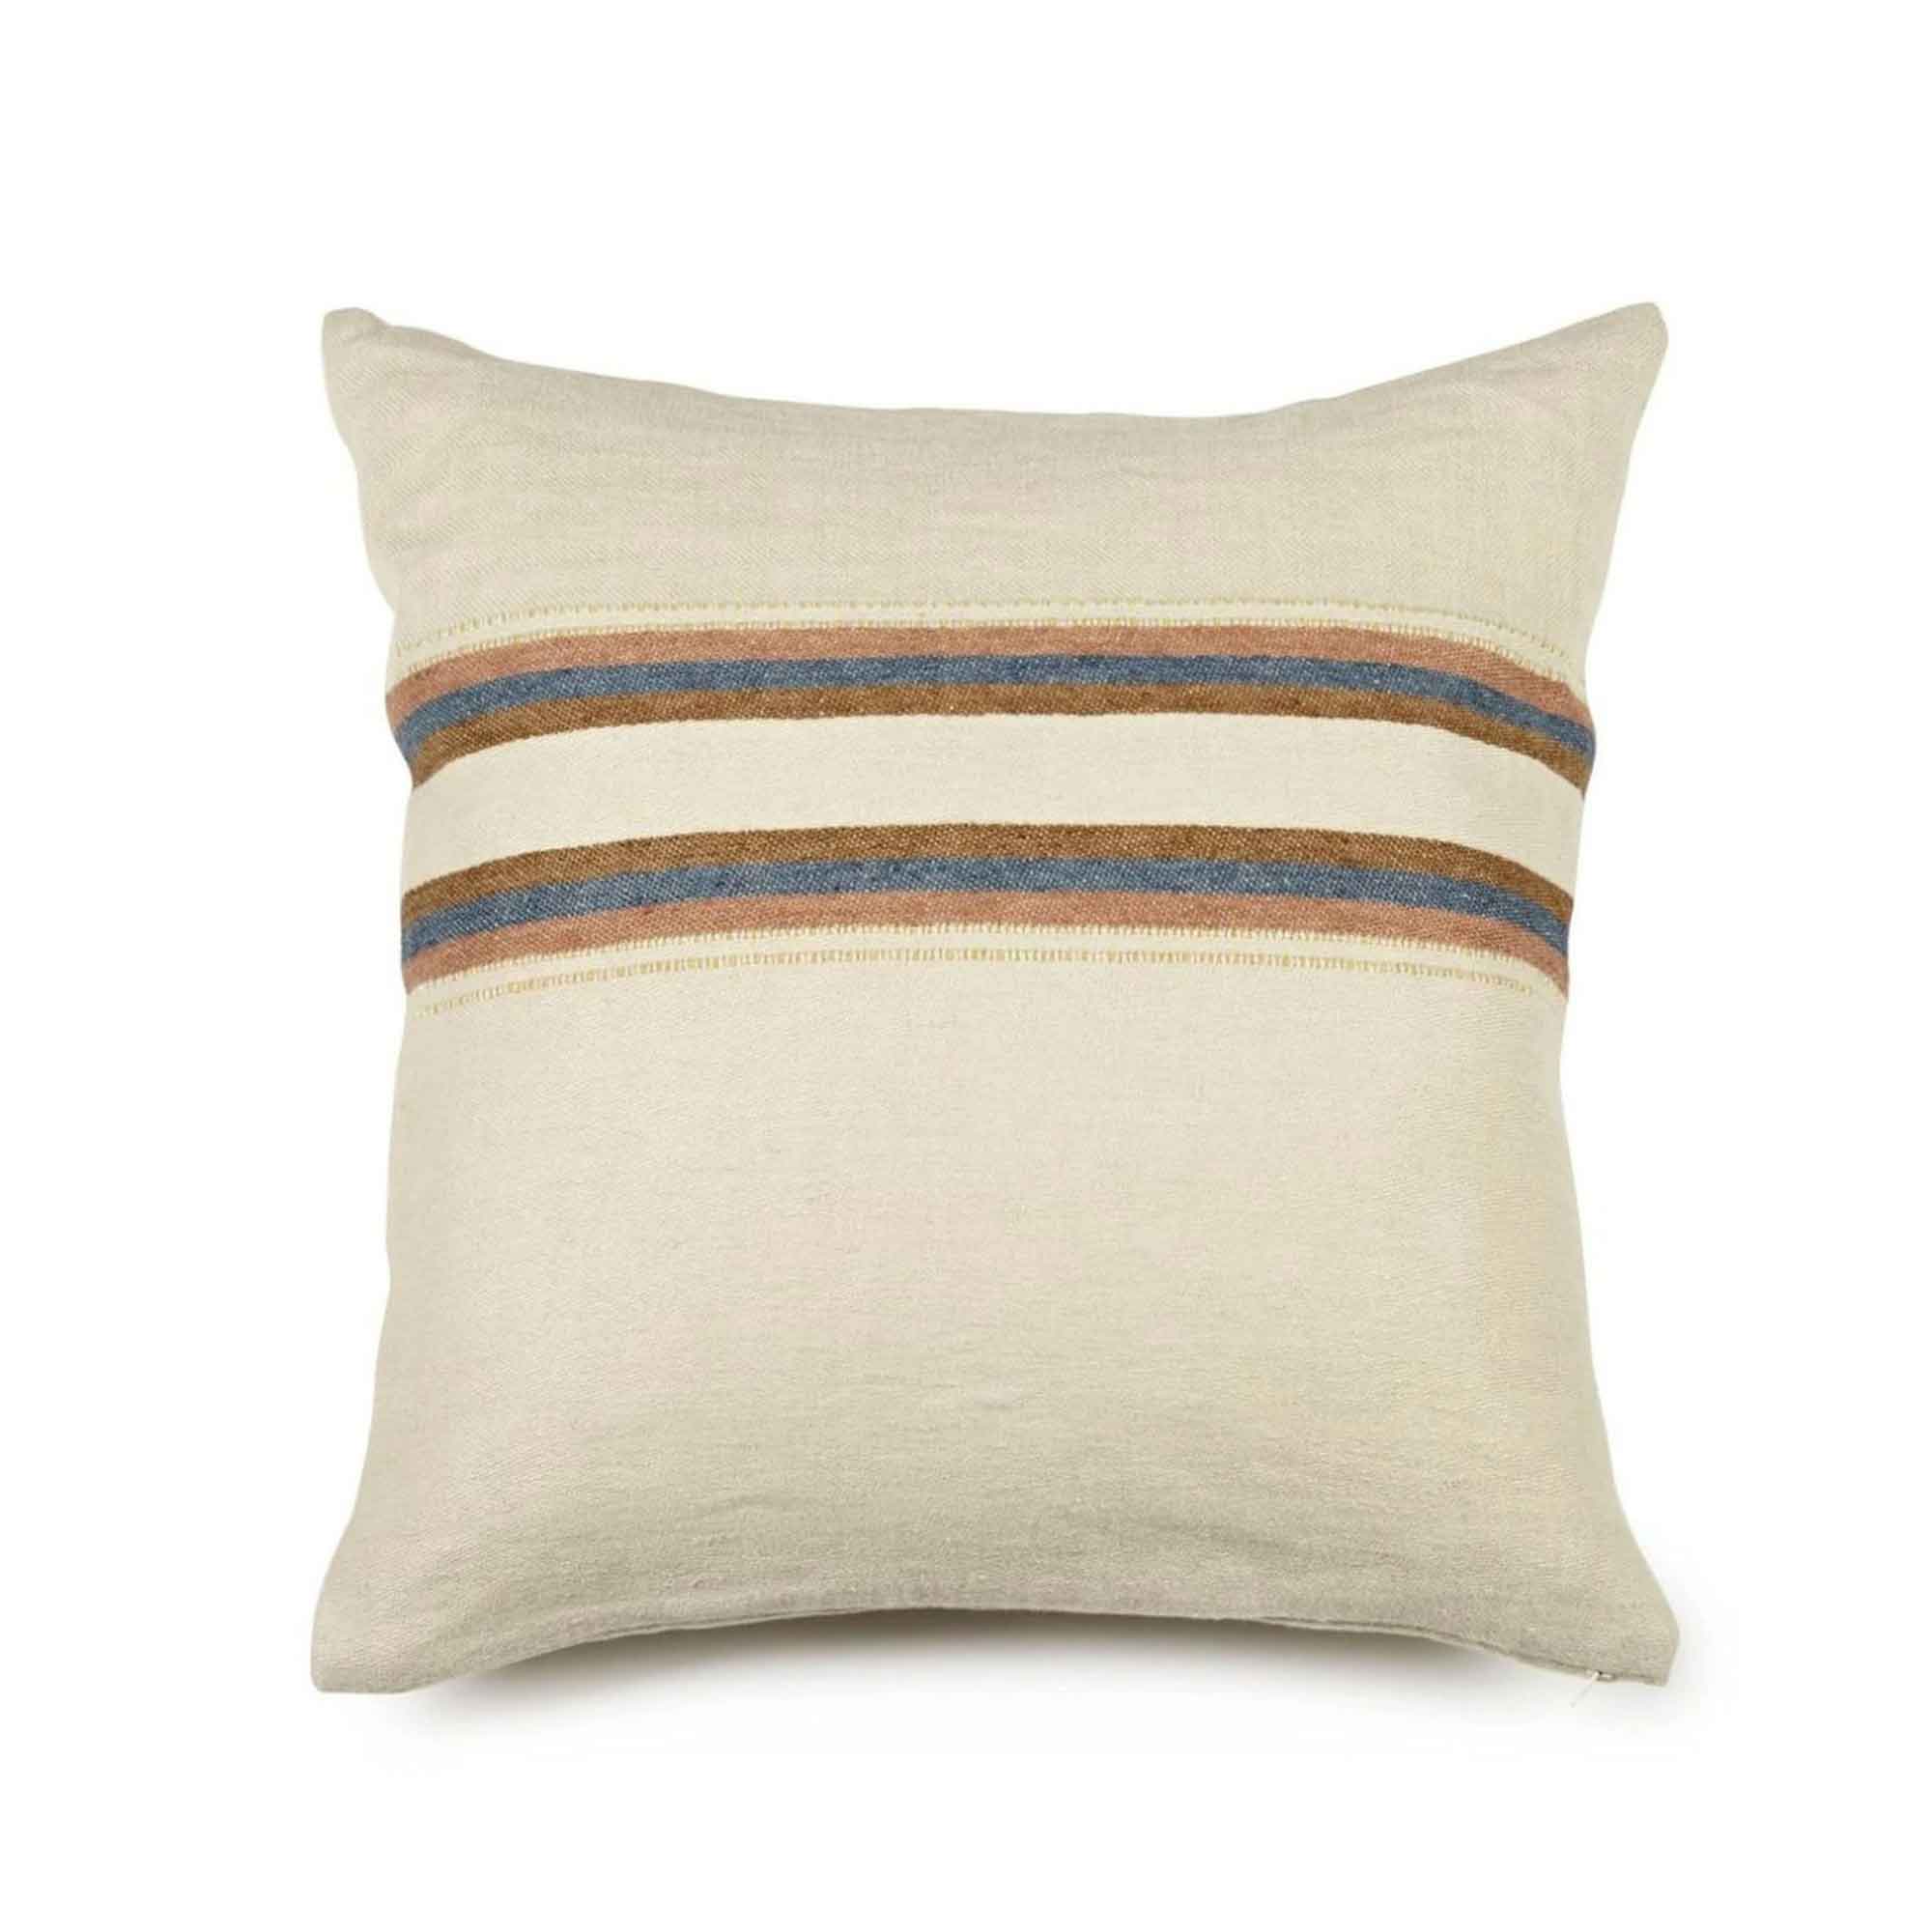 Belgian linen throw pillow cover flat lay product shot in color Harlan by Libeco for South Hous.